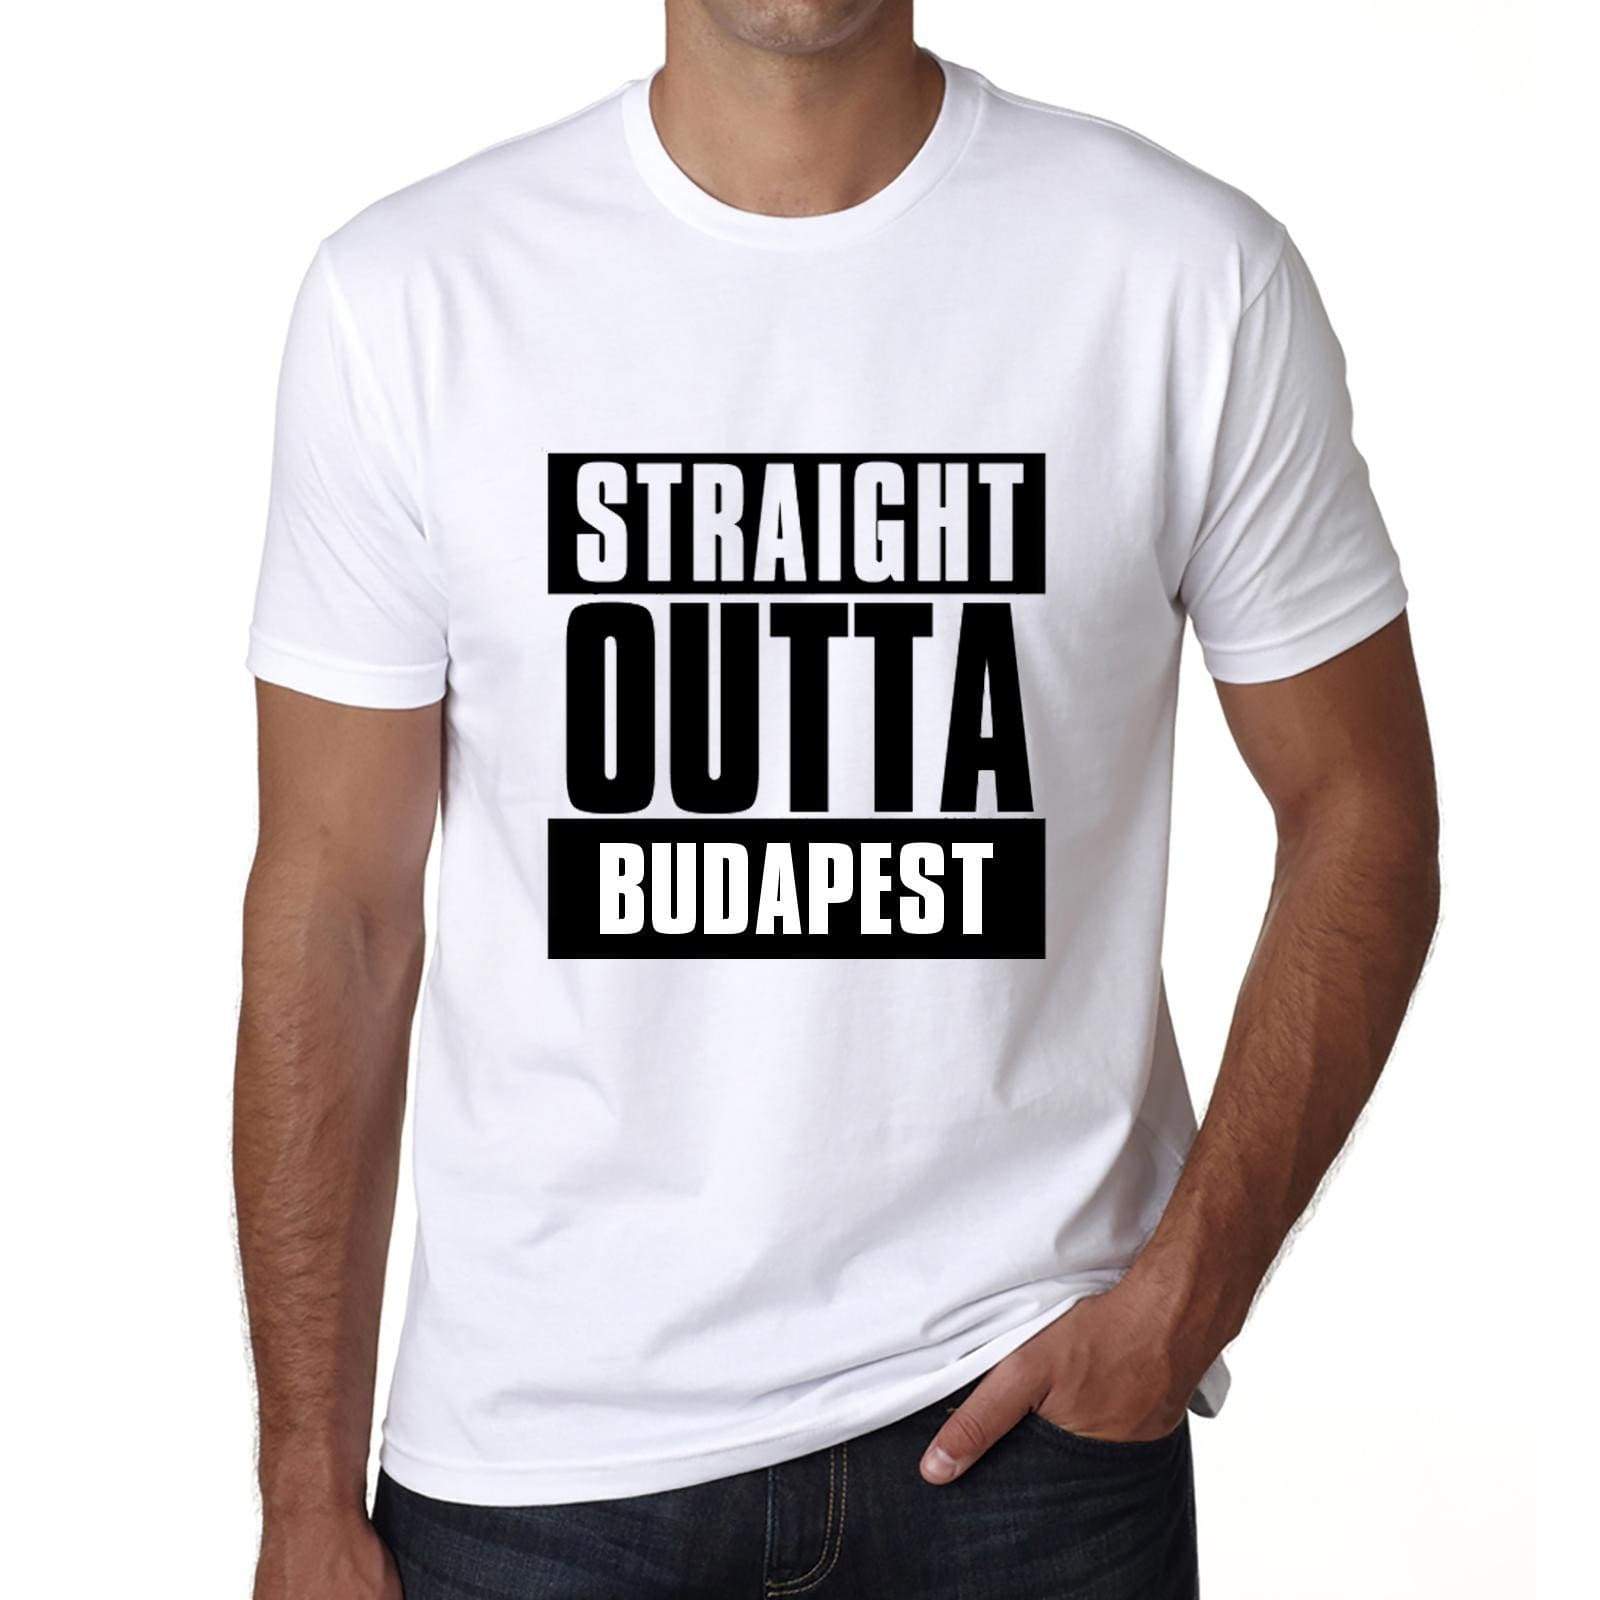 Straight Outta Budapest Mens Short Sleeve Round Neck T-Shirt 00027 - White / S - Casual